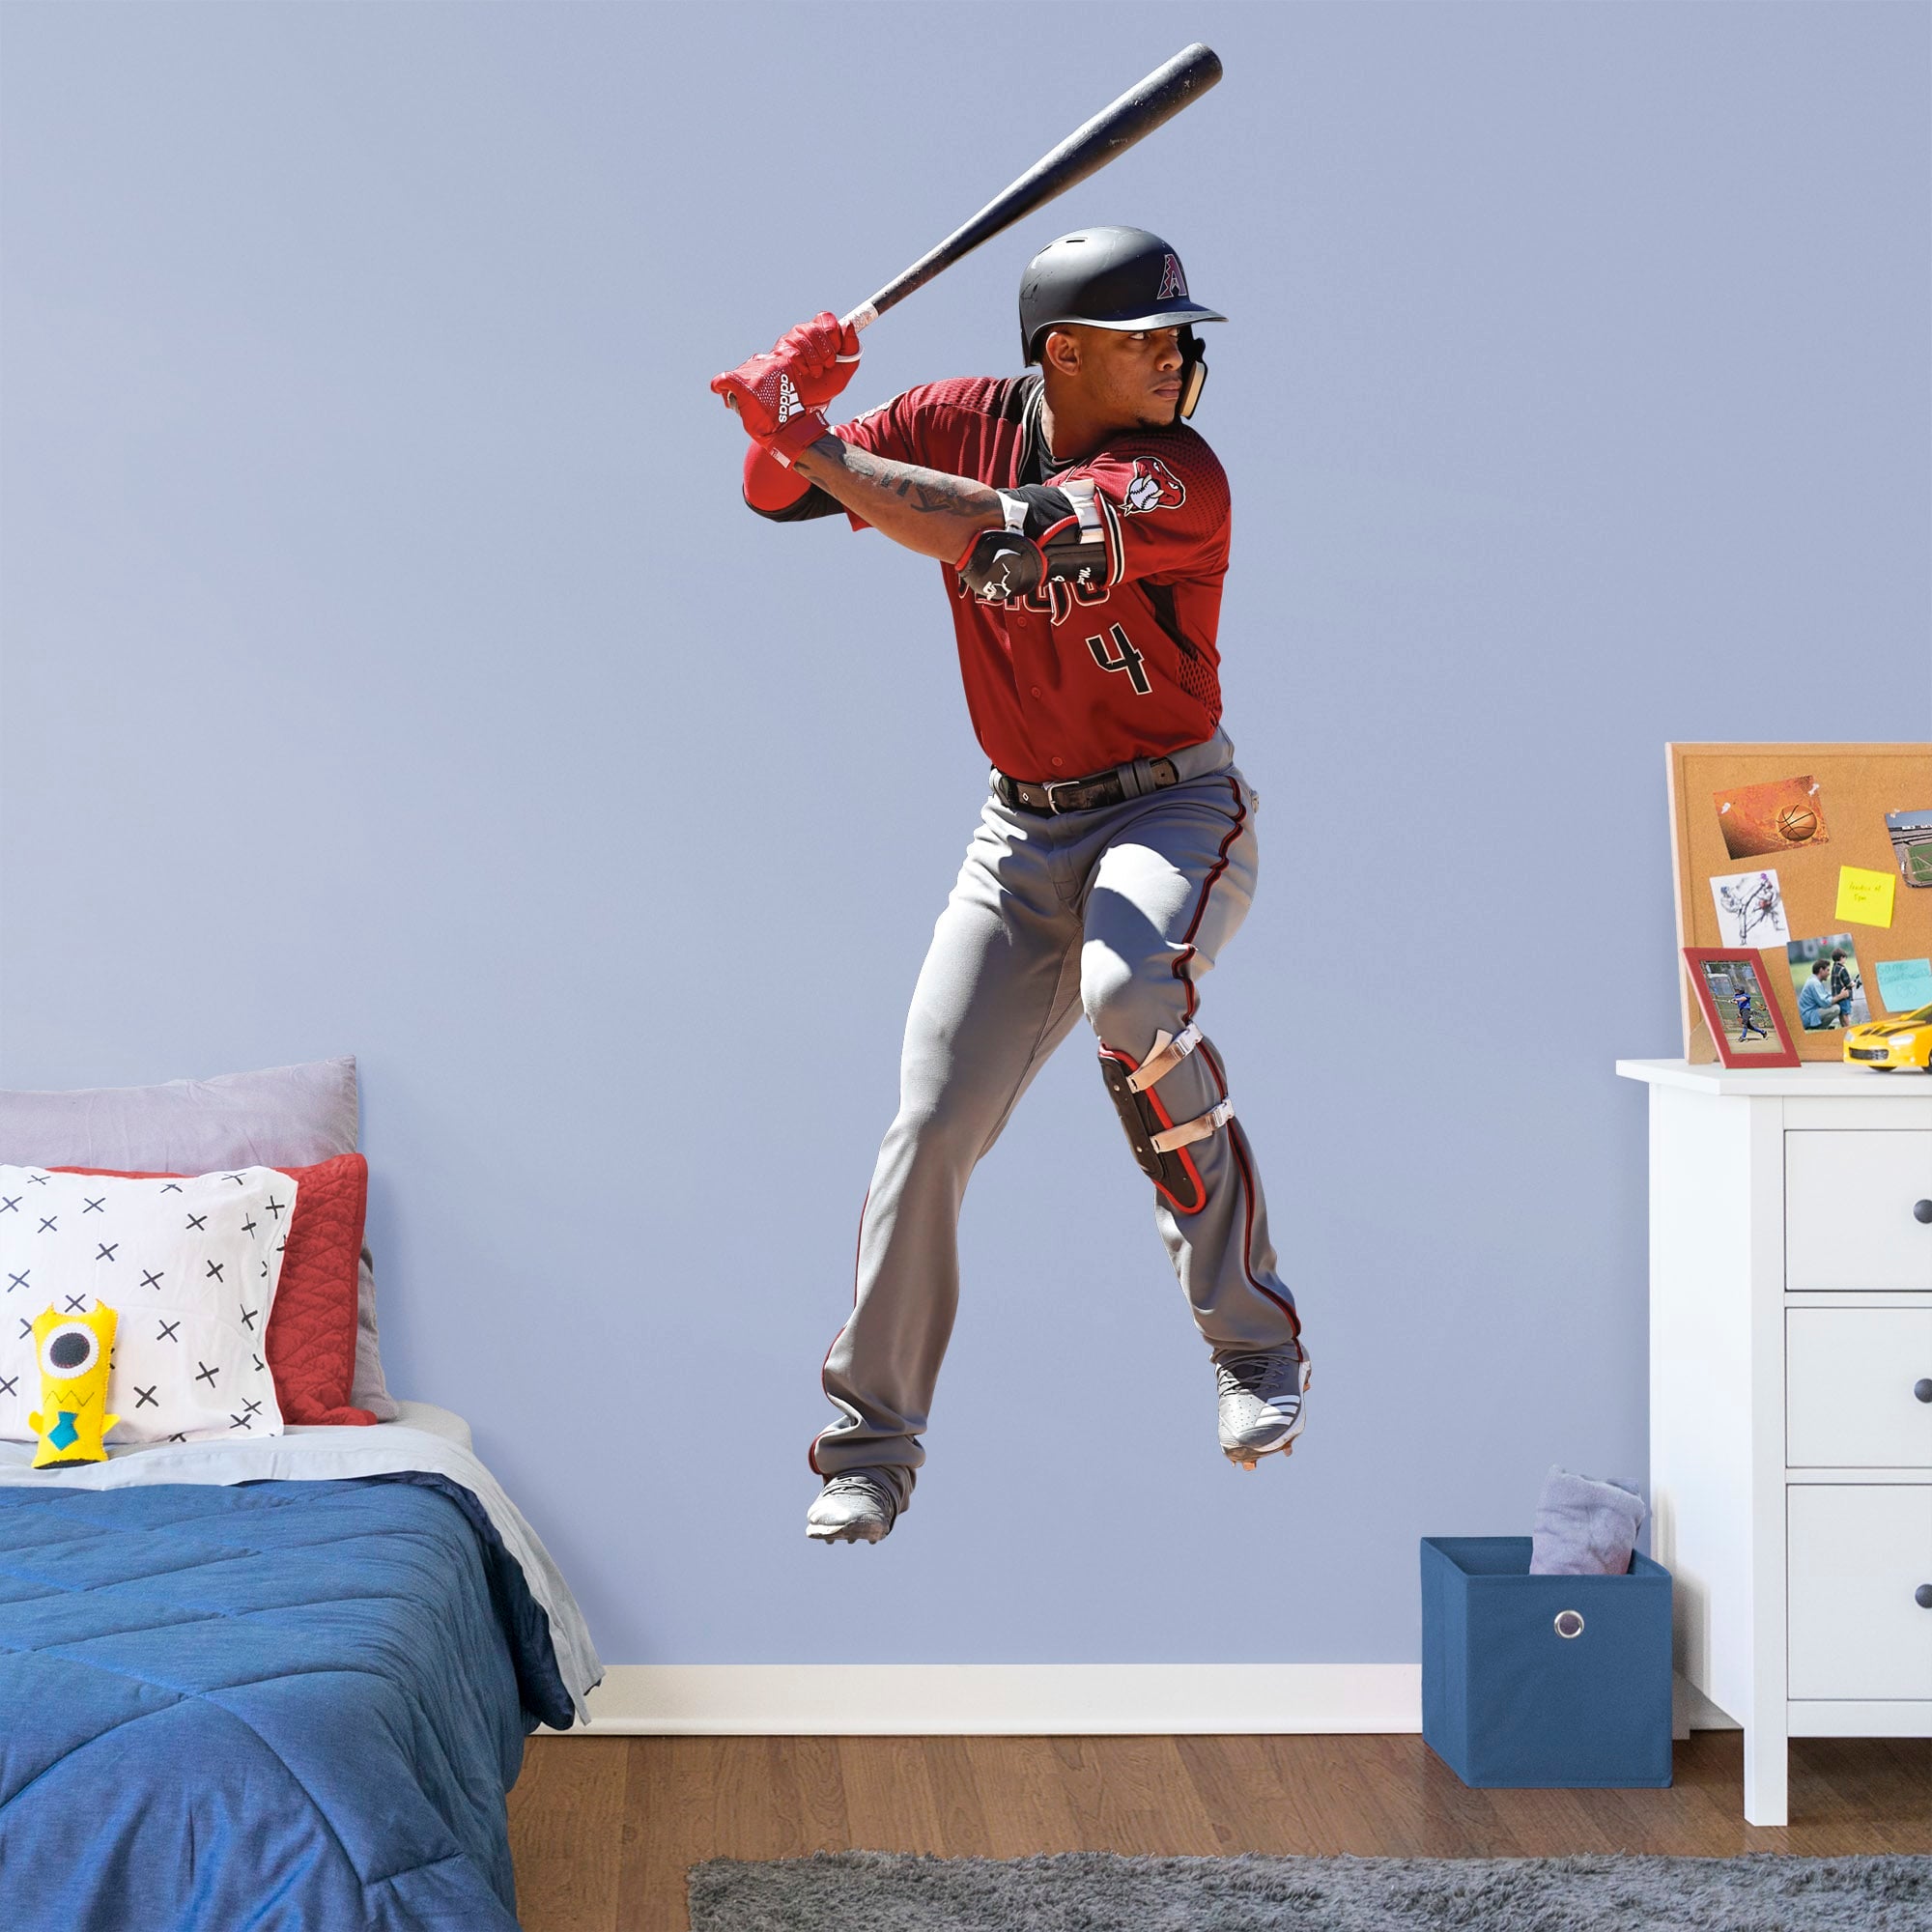 Ketel Marte for Arizona Diamondbacks - Officially Licensed MLB Removable Wall Decal Life-Size Athlete + 2 Decals (35"W x 86"H) b